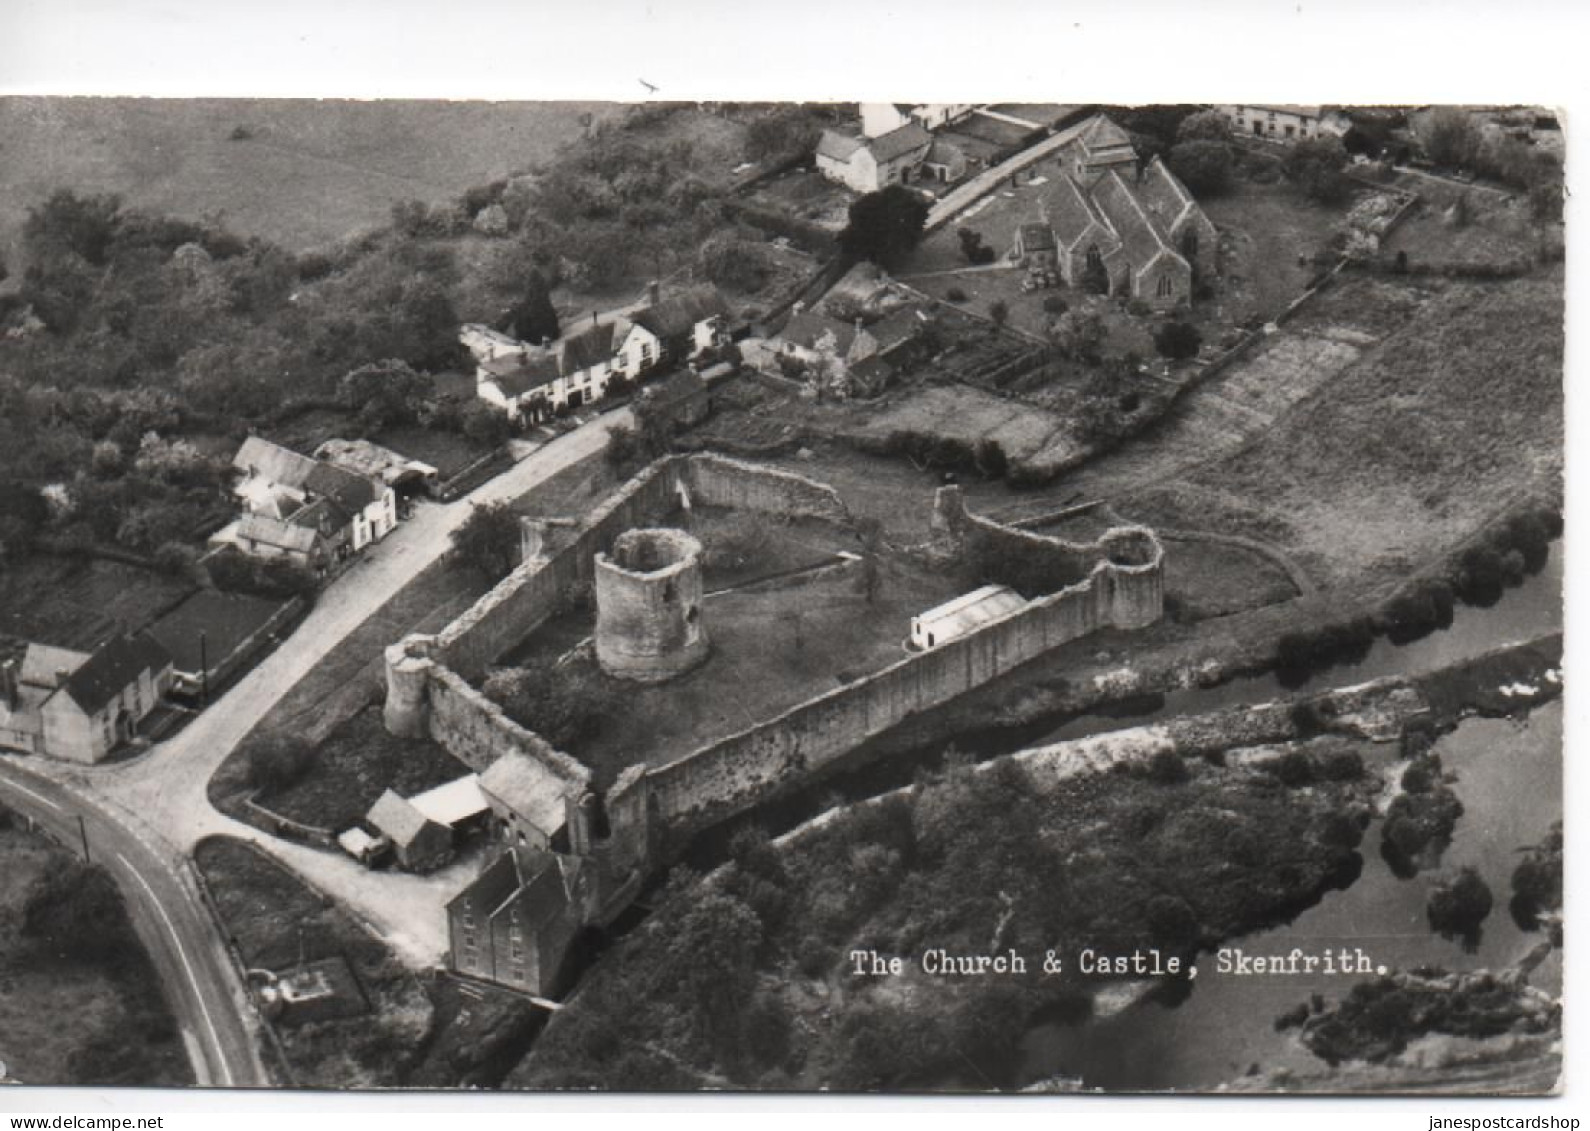 REAL PHOTOGRAPHIC POSTCARD - AERIAL  PHOTO - THE CHURCH & CASTLE - SKENFRITH - MONMOUTH - WALES - Monmouthshire